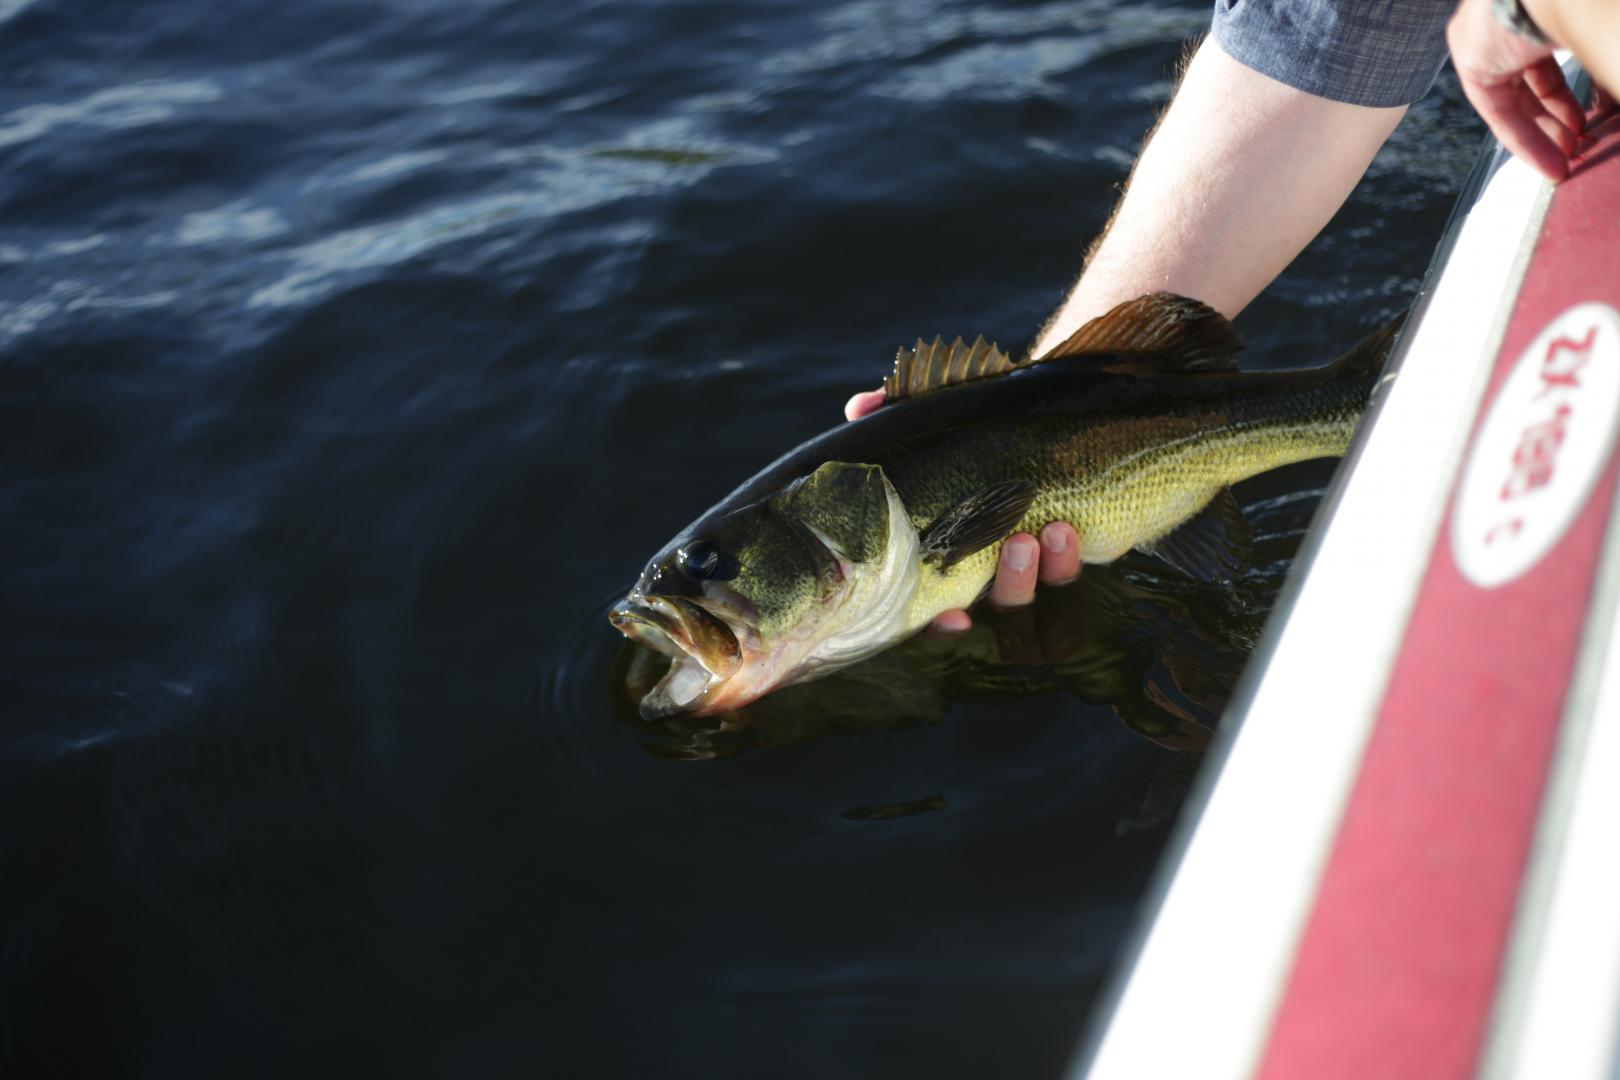 Bass fishing doesn't have to be complicated